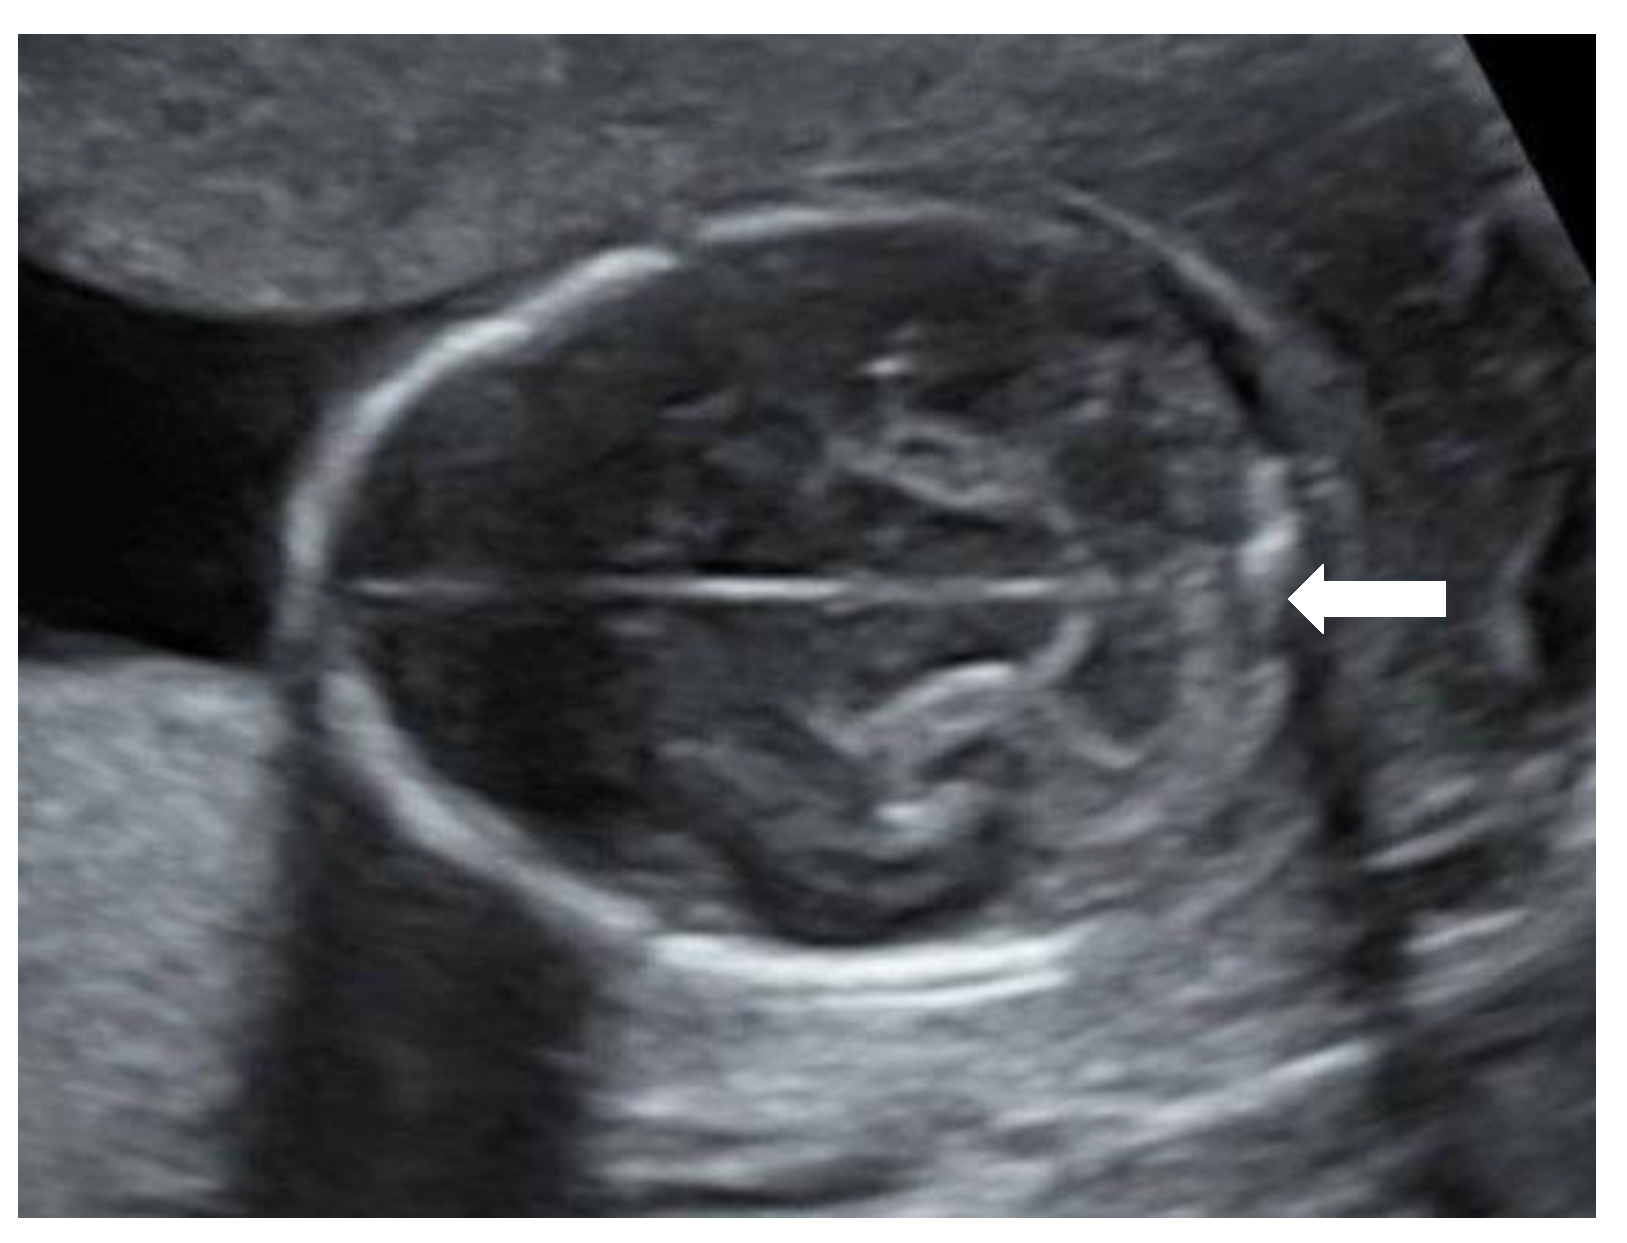 anencephaly ultrasound findings